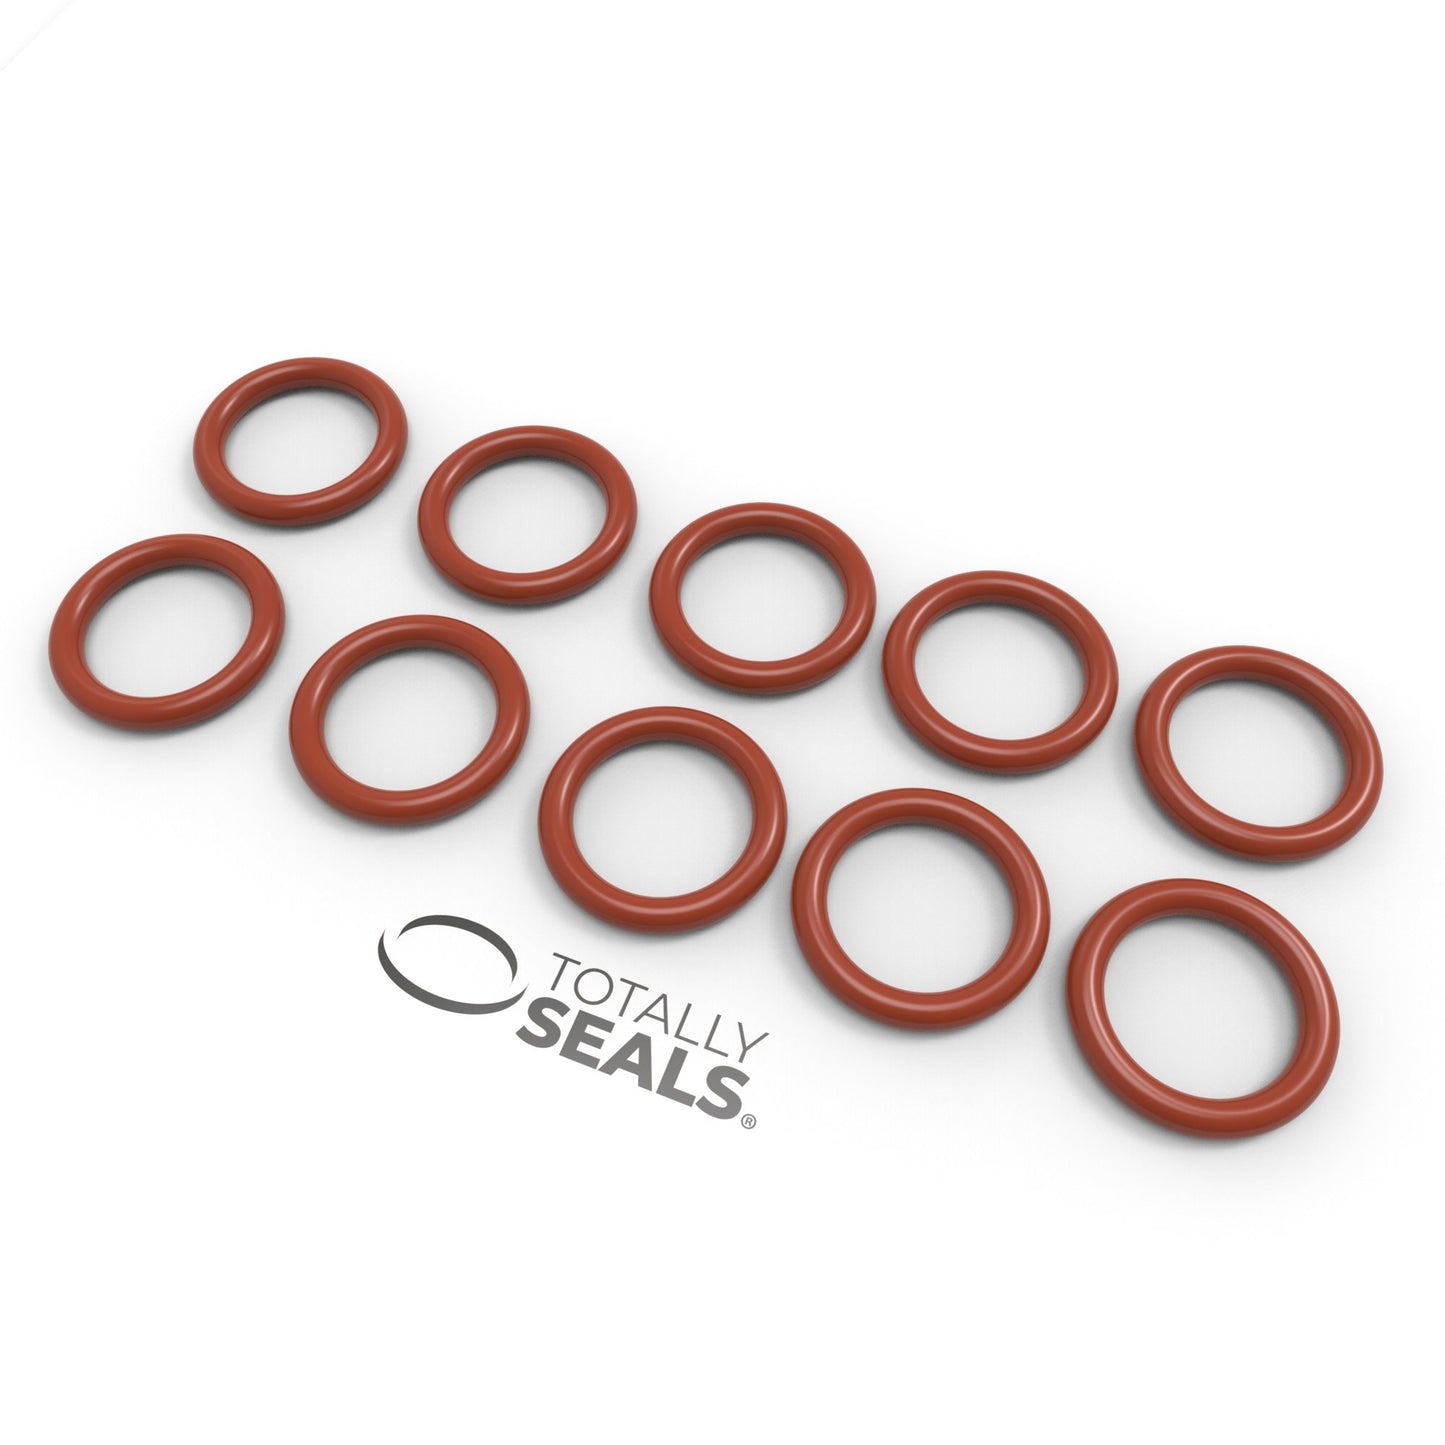 5mm x 2mm (9mm OD) Silicone O-Rings - Totally Seals®